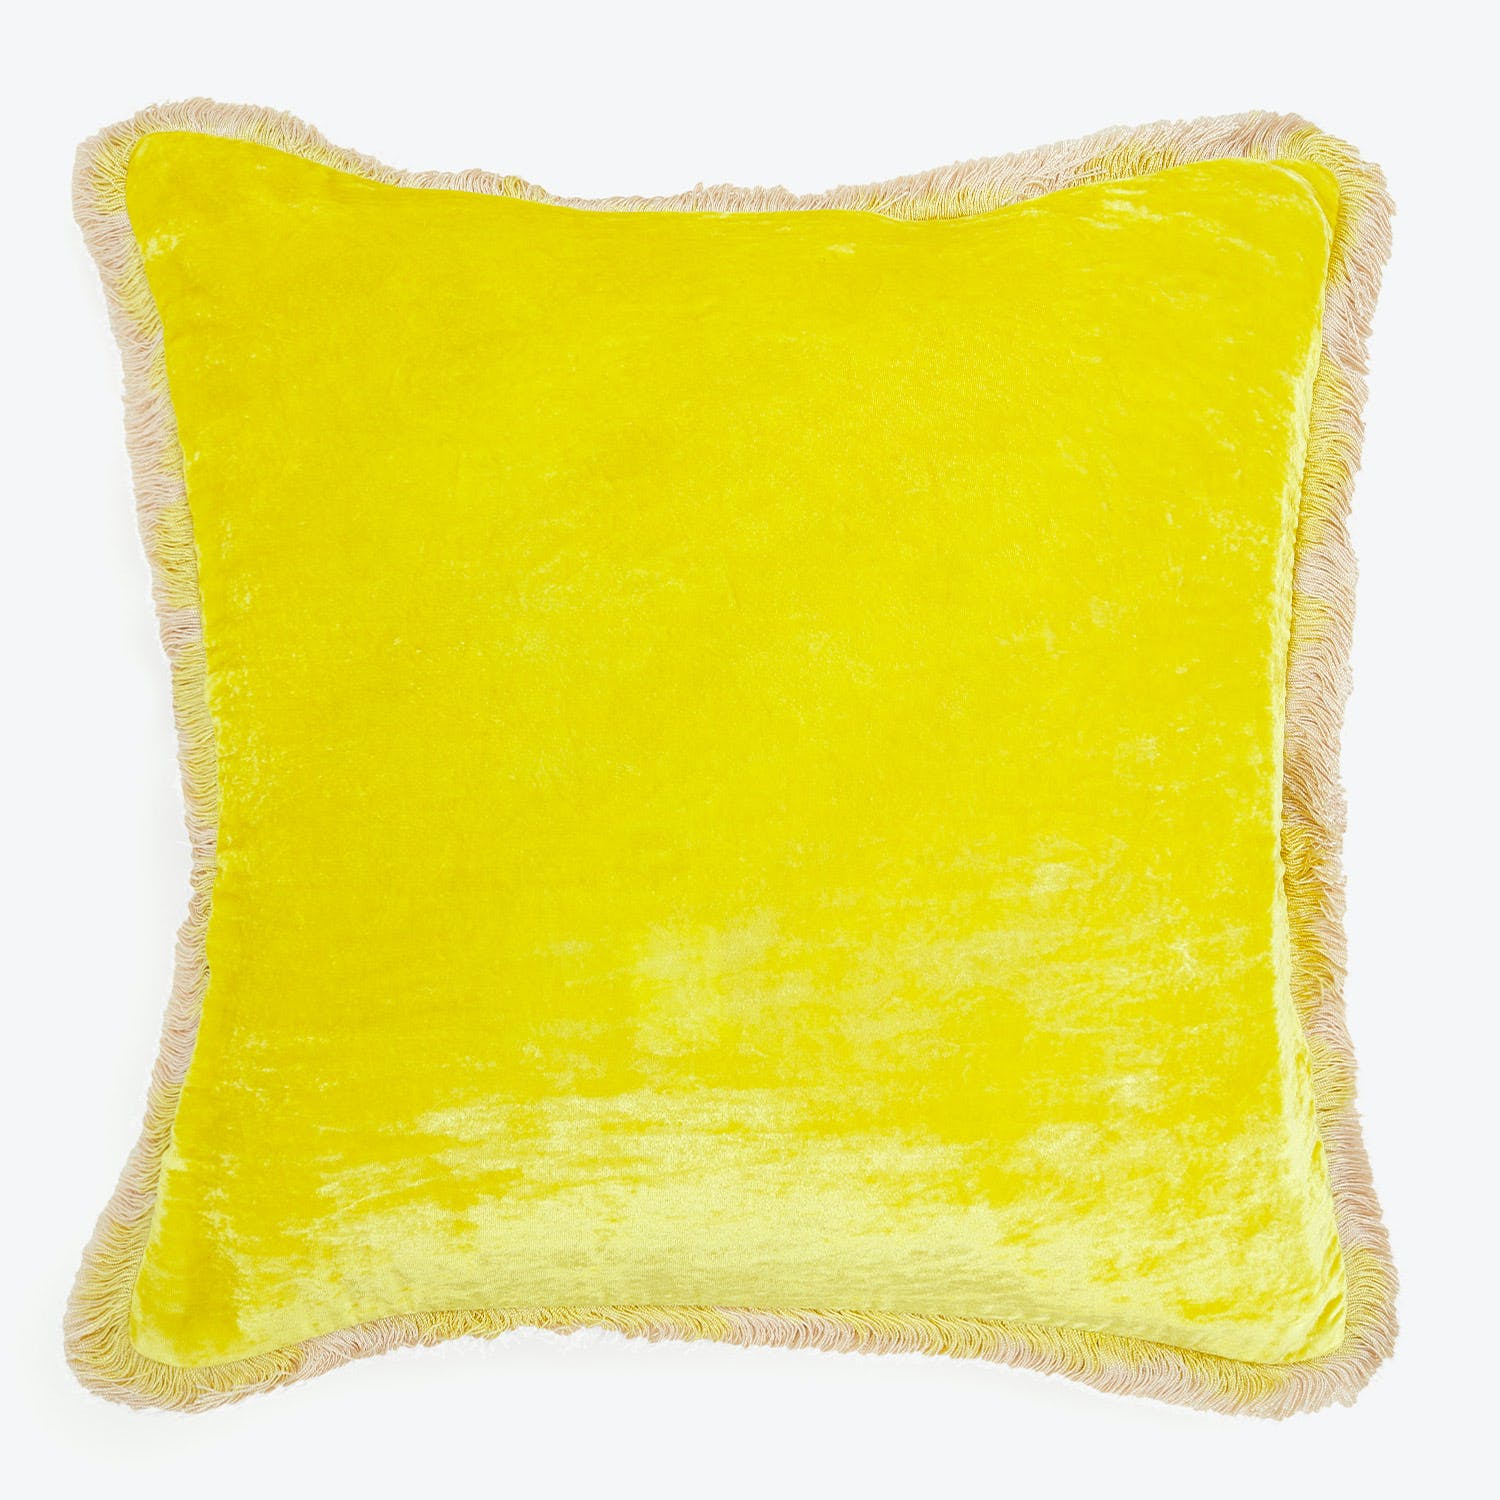 Square yellow decorative pillow with plush texture and fringe trim.